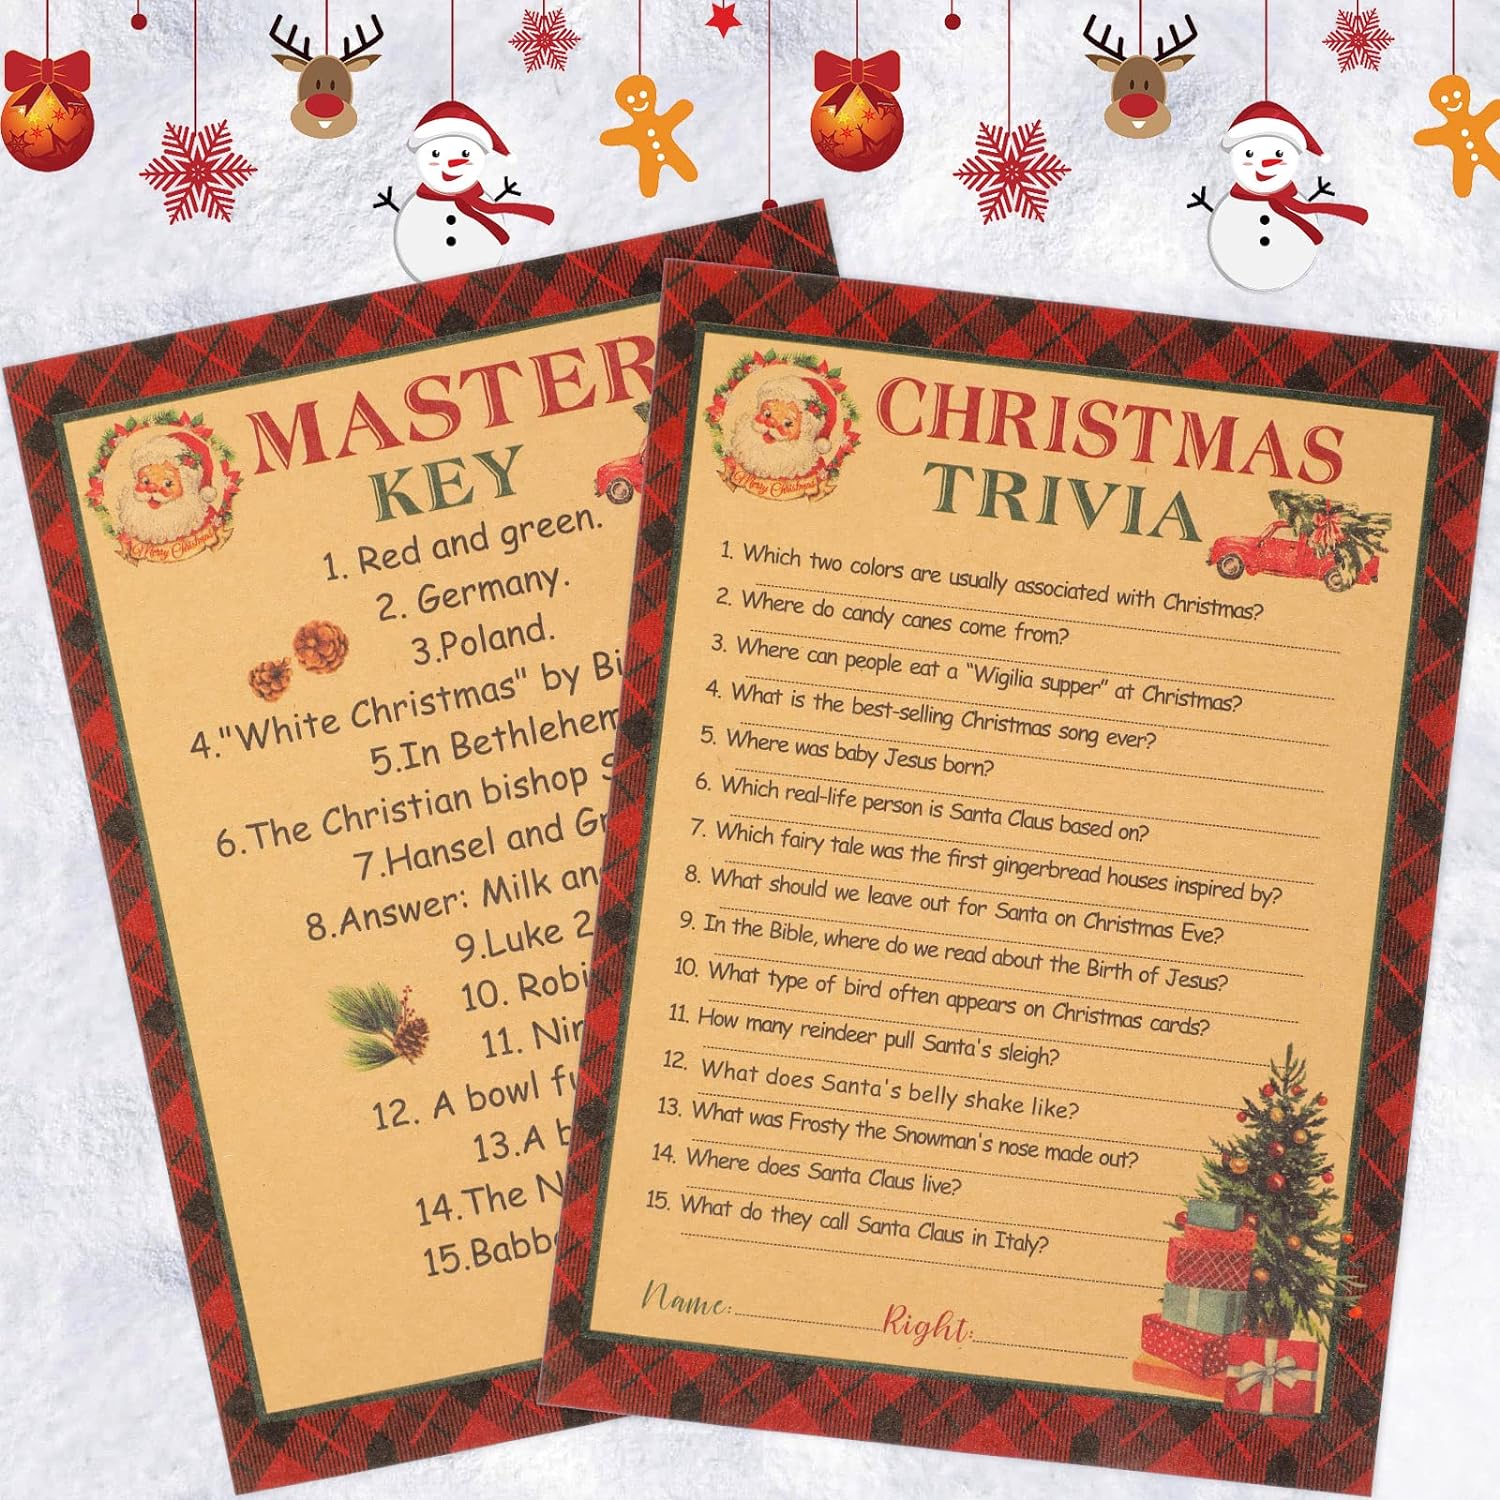 70 Pcs Christmas Trivia Games Xmas Word Scramble Game Holiday Trivia Cards for Family Christmas Party Trivia Cards Challenge Game Fun Game 60 Sheets Question and 10 Sheets Answer 7 x 10 Inches